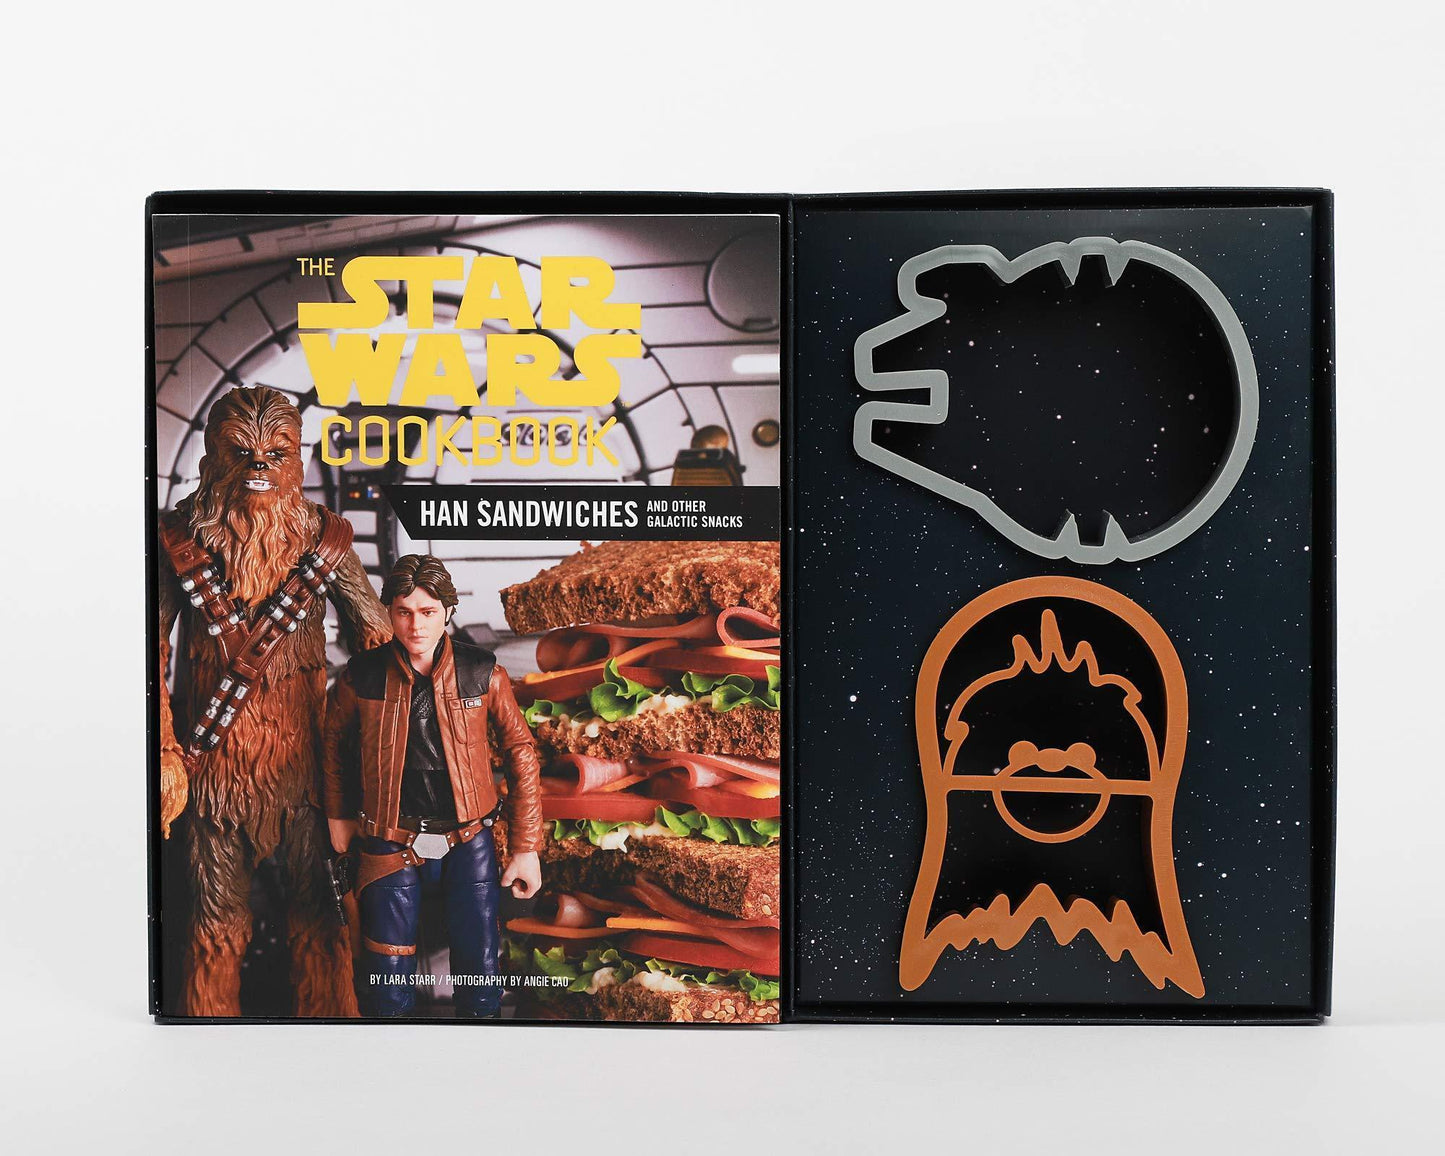 The Star Wars Cookbook: Han Sandwiches and Other Galactic Snacks - ZZGames.dk